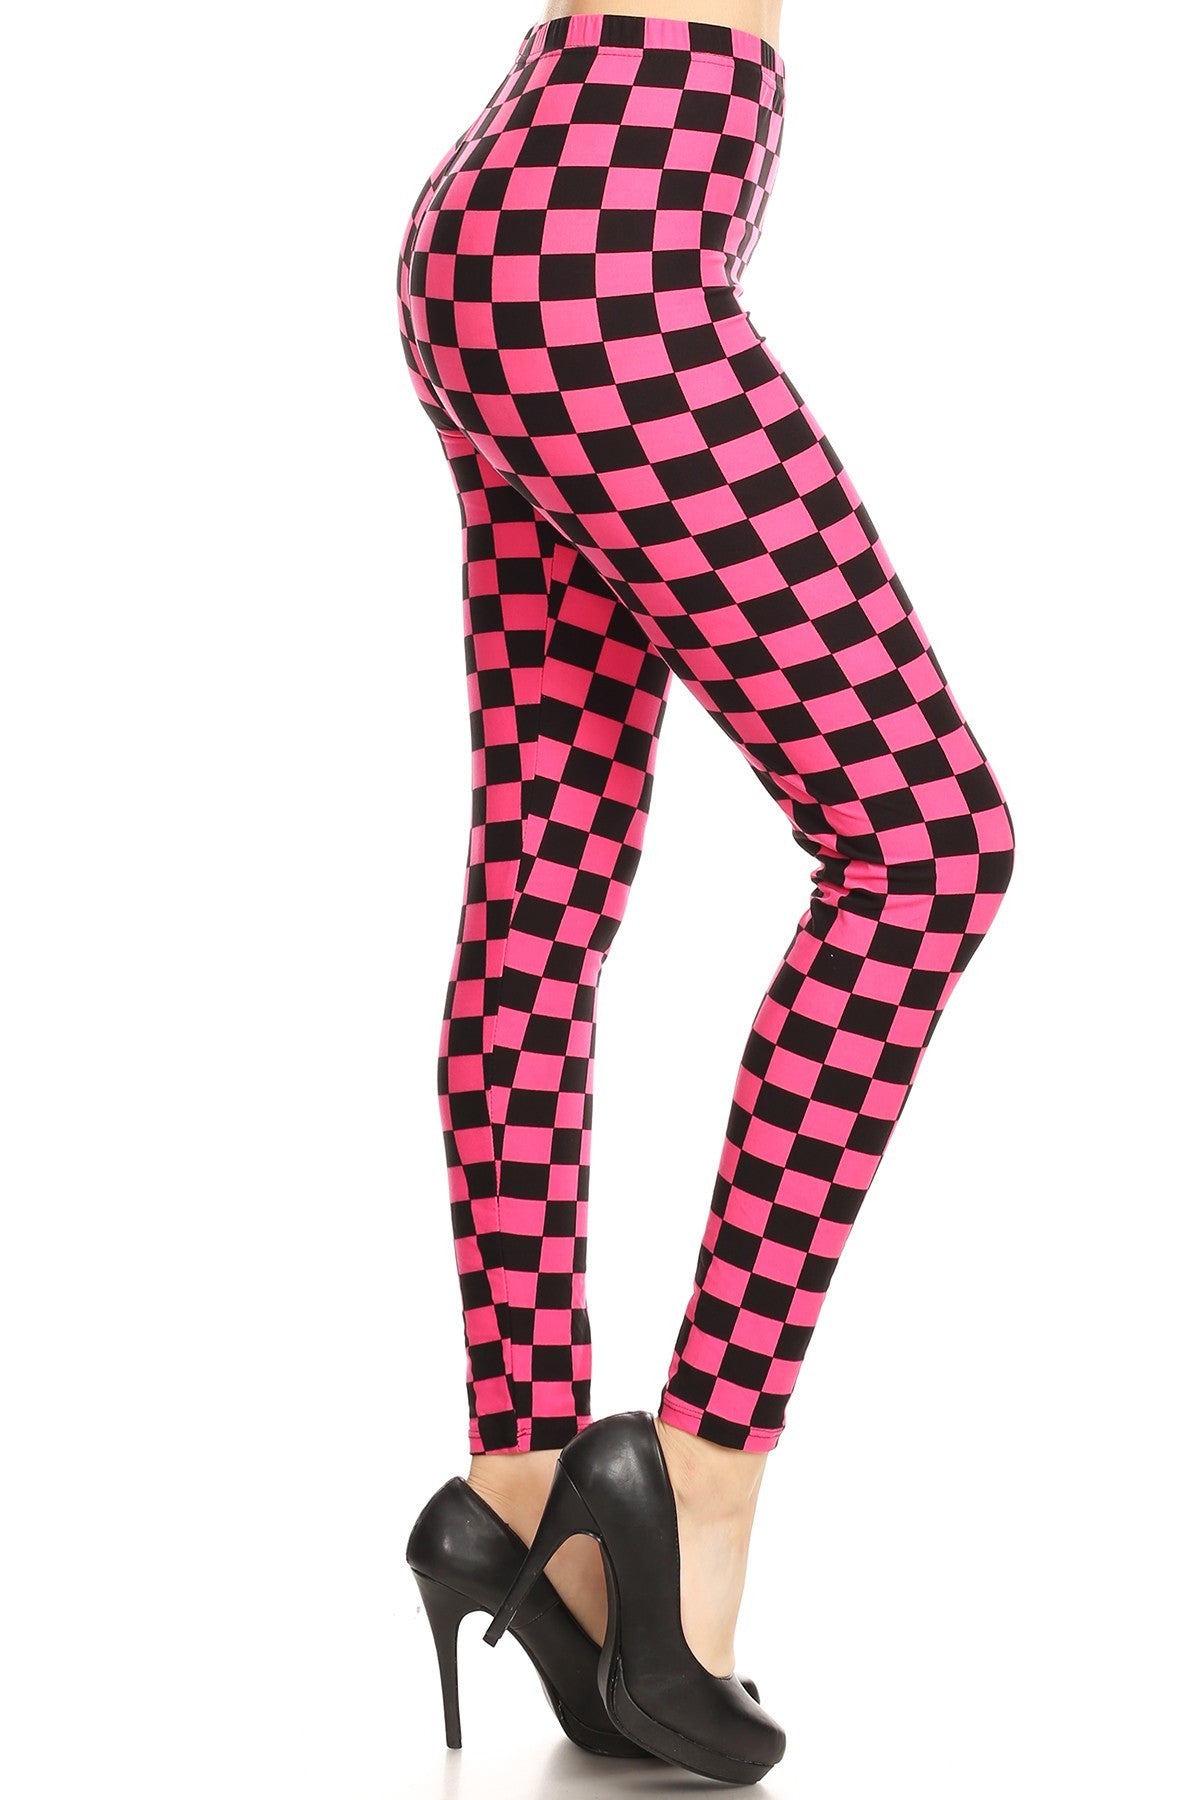 Leggings: CHEQMATE CHESS Printed High Waisted Leggings In A Fitted Style, With An Elastic Waistband